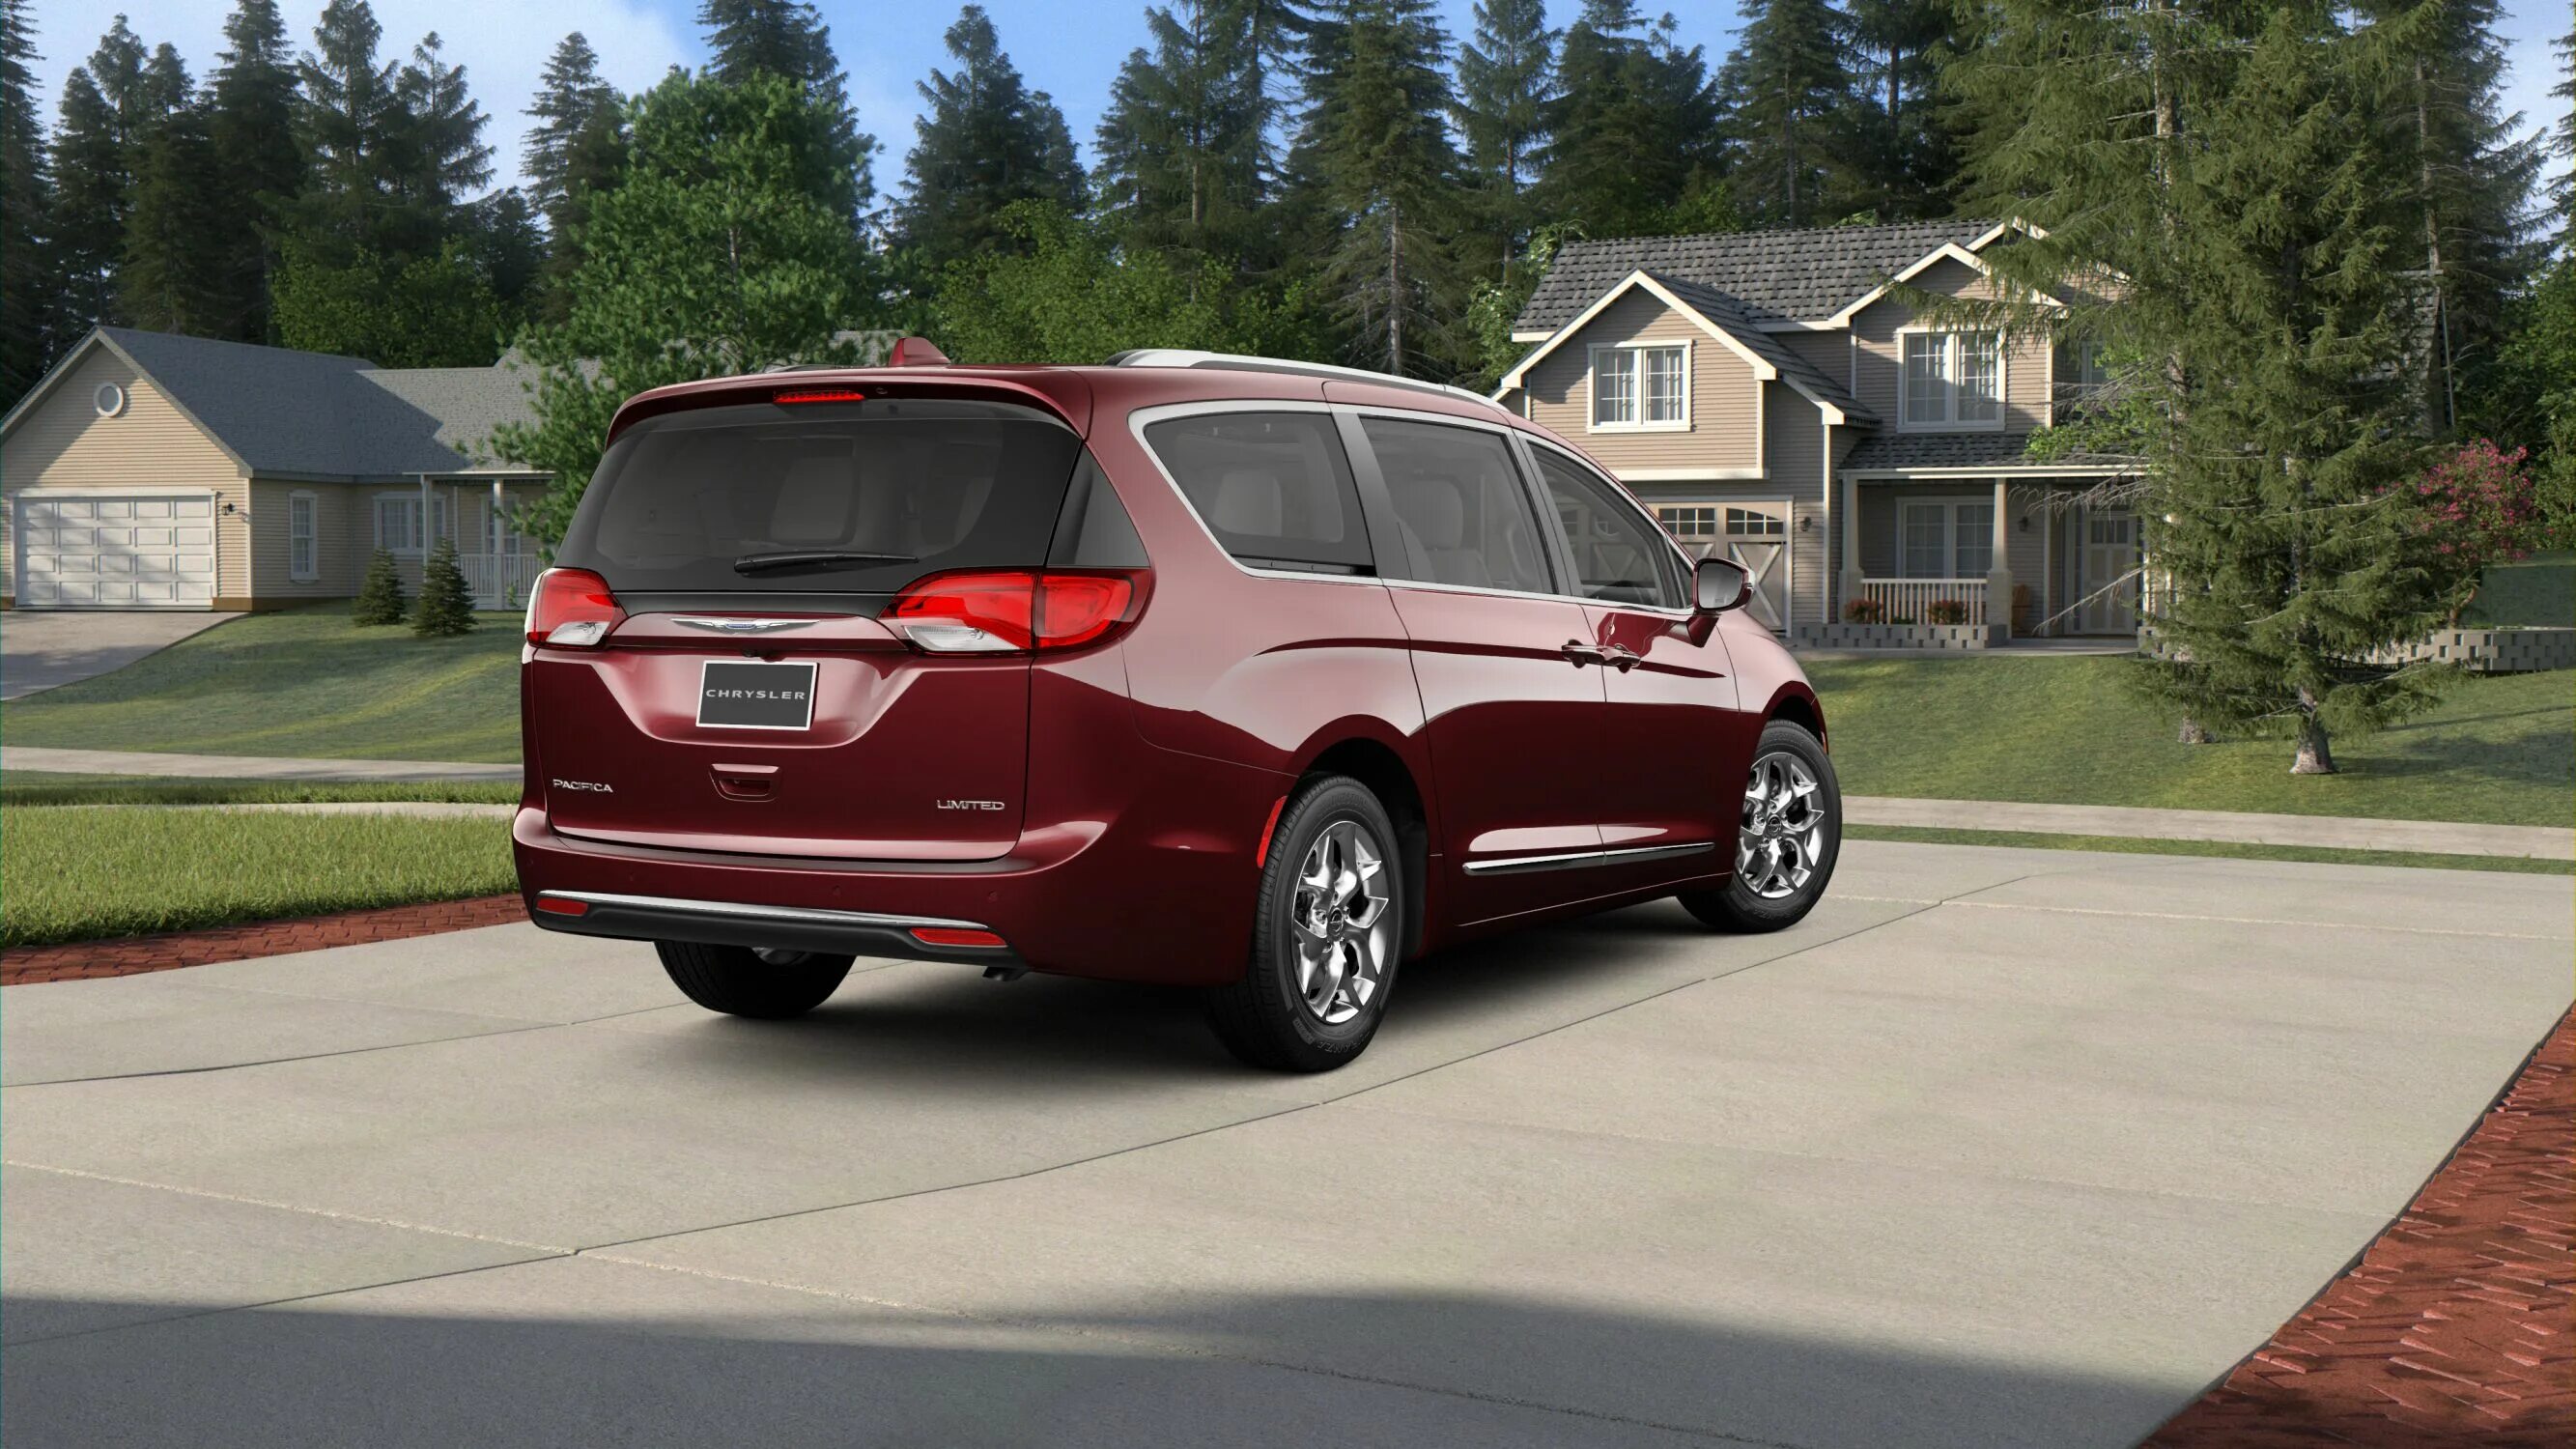 Chrysler Pacifica 2022. Chrysler Pacifica 2019. Крайслер Пацифика 2019. Chrysler Pacifica Limited. New l ru